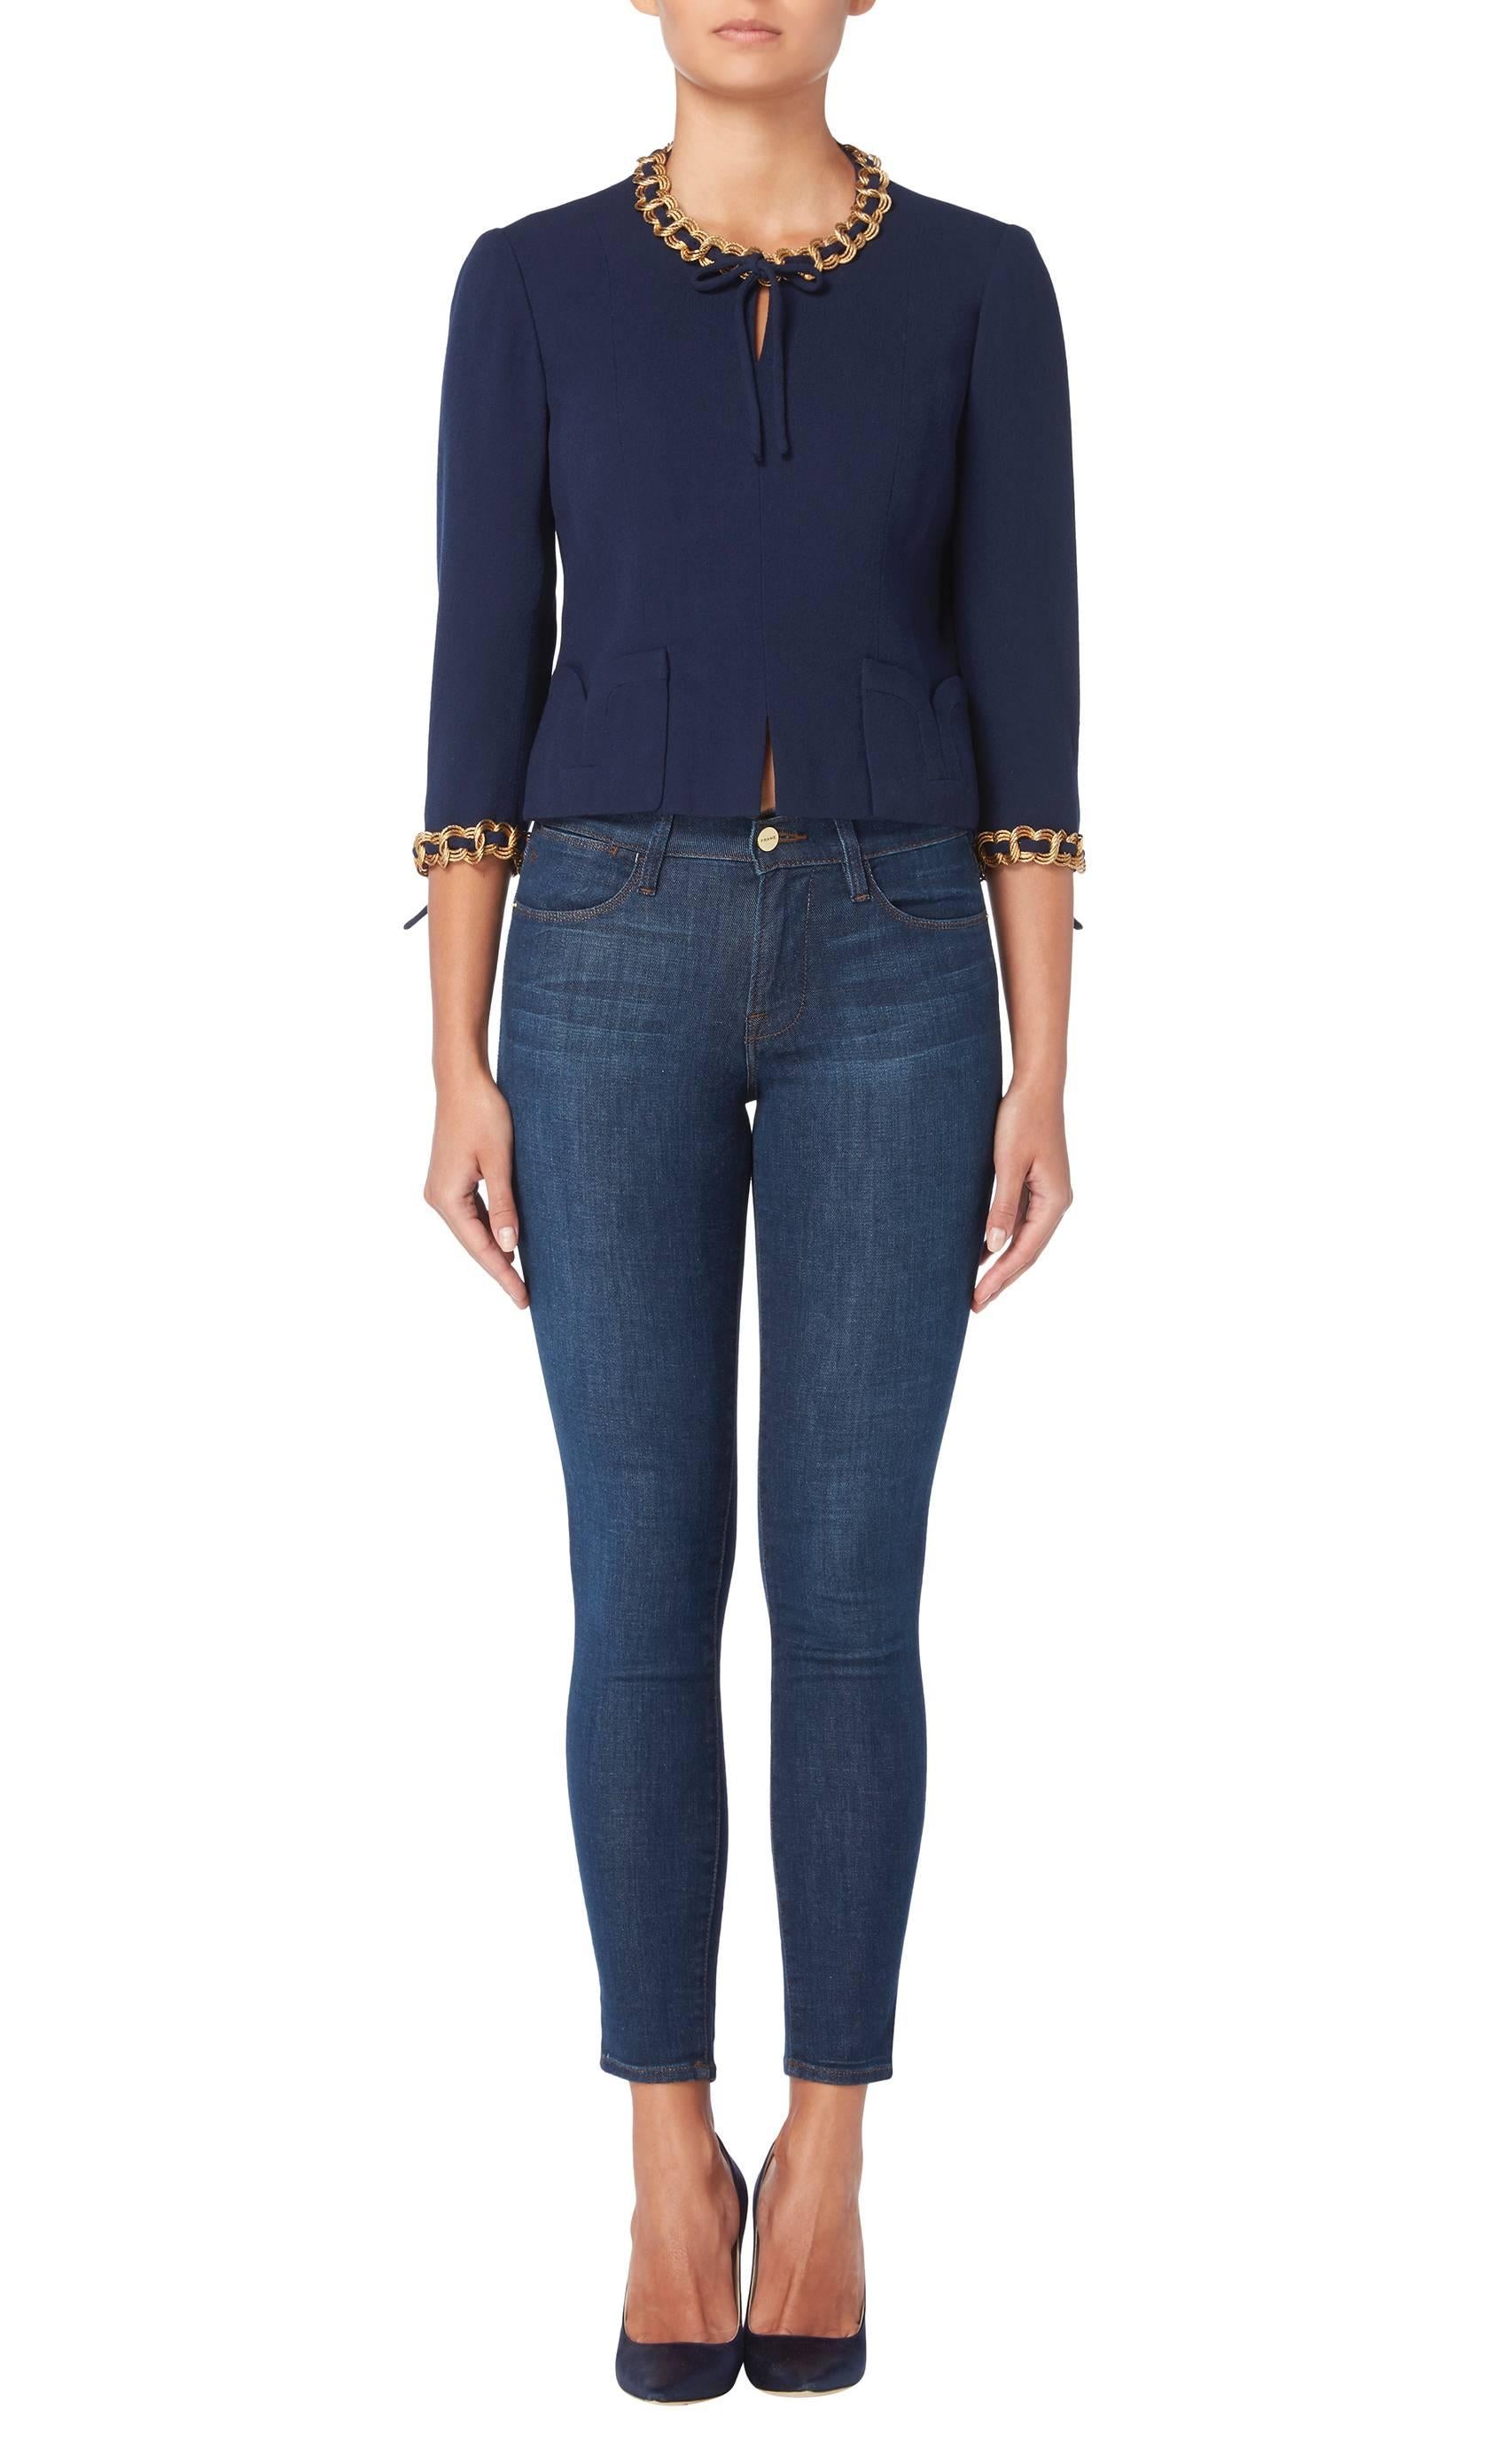 The perfect way to introduce vintage haute couture into a contemporary wardrobe, this Chanel navy top is easy to wear and incredibly chic! Constructed in navy moss crepe, the top has three-quarter length sleeves and outside pockets on the waist. A